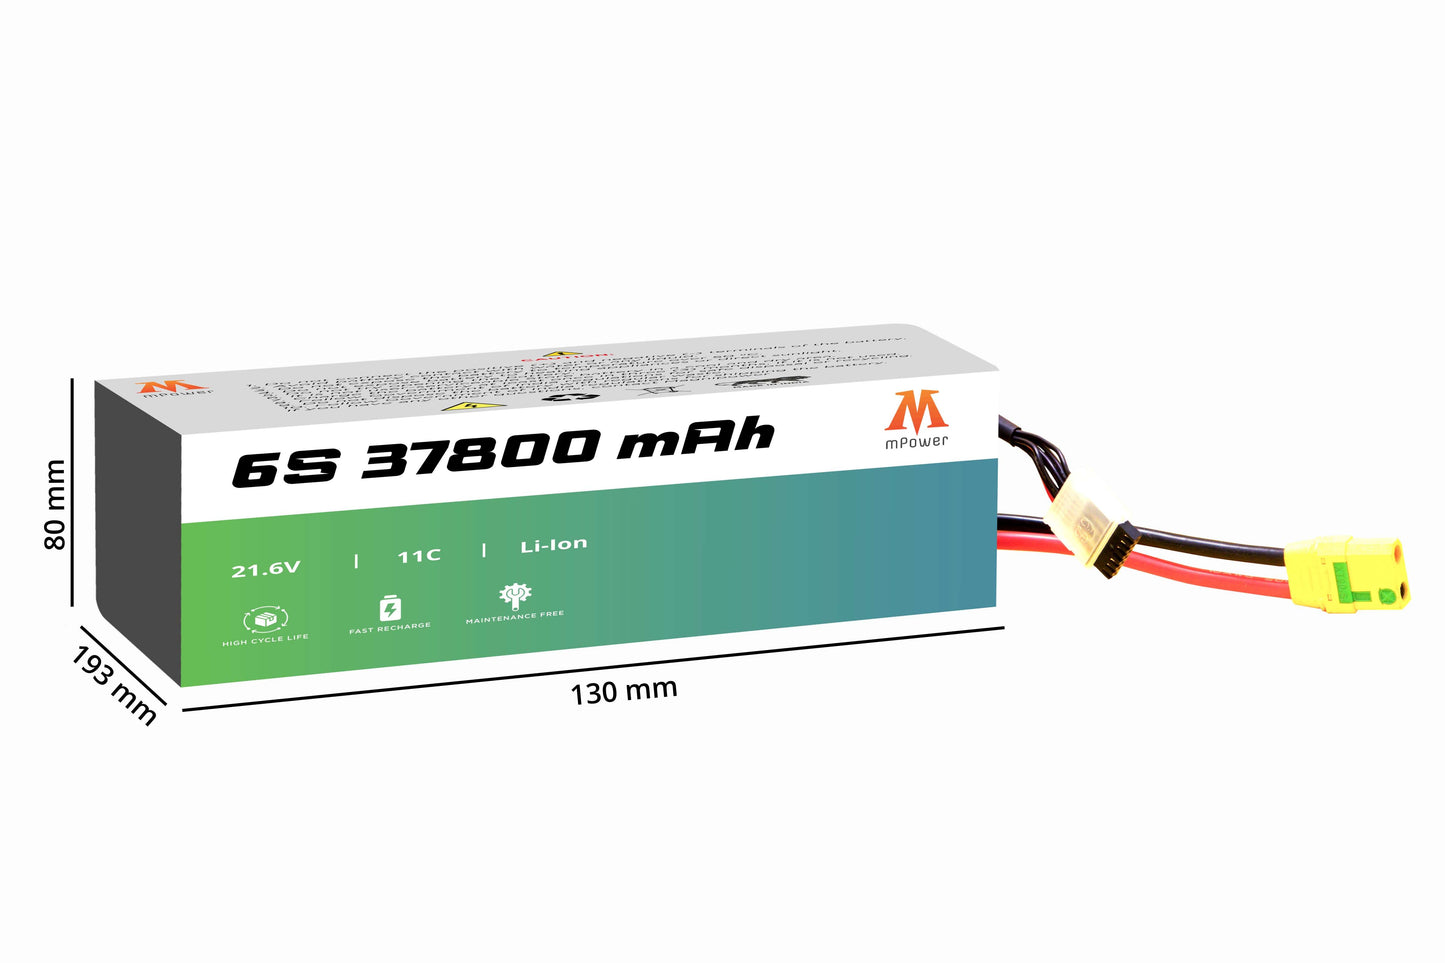 mPower 6S 37800mAh Lithium-Ion Battery for Delivery Drones